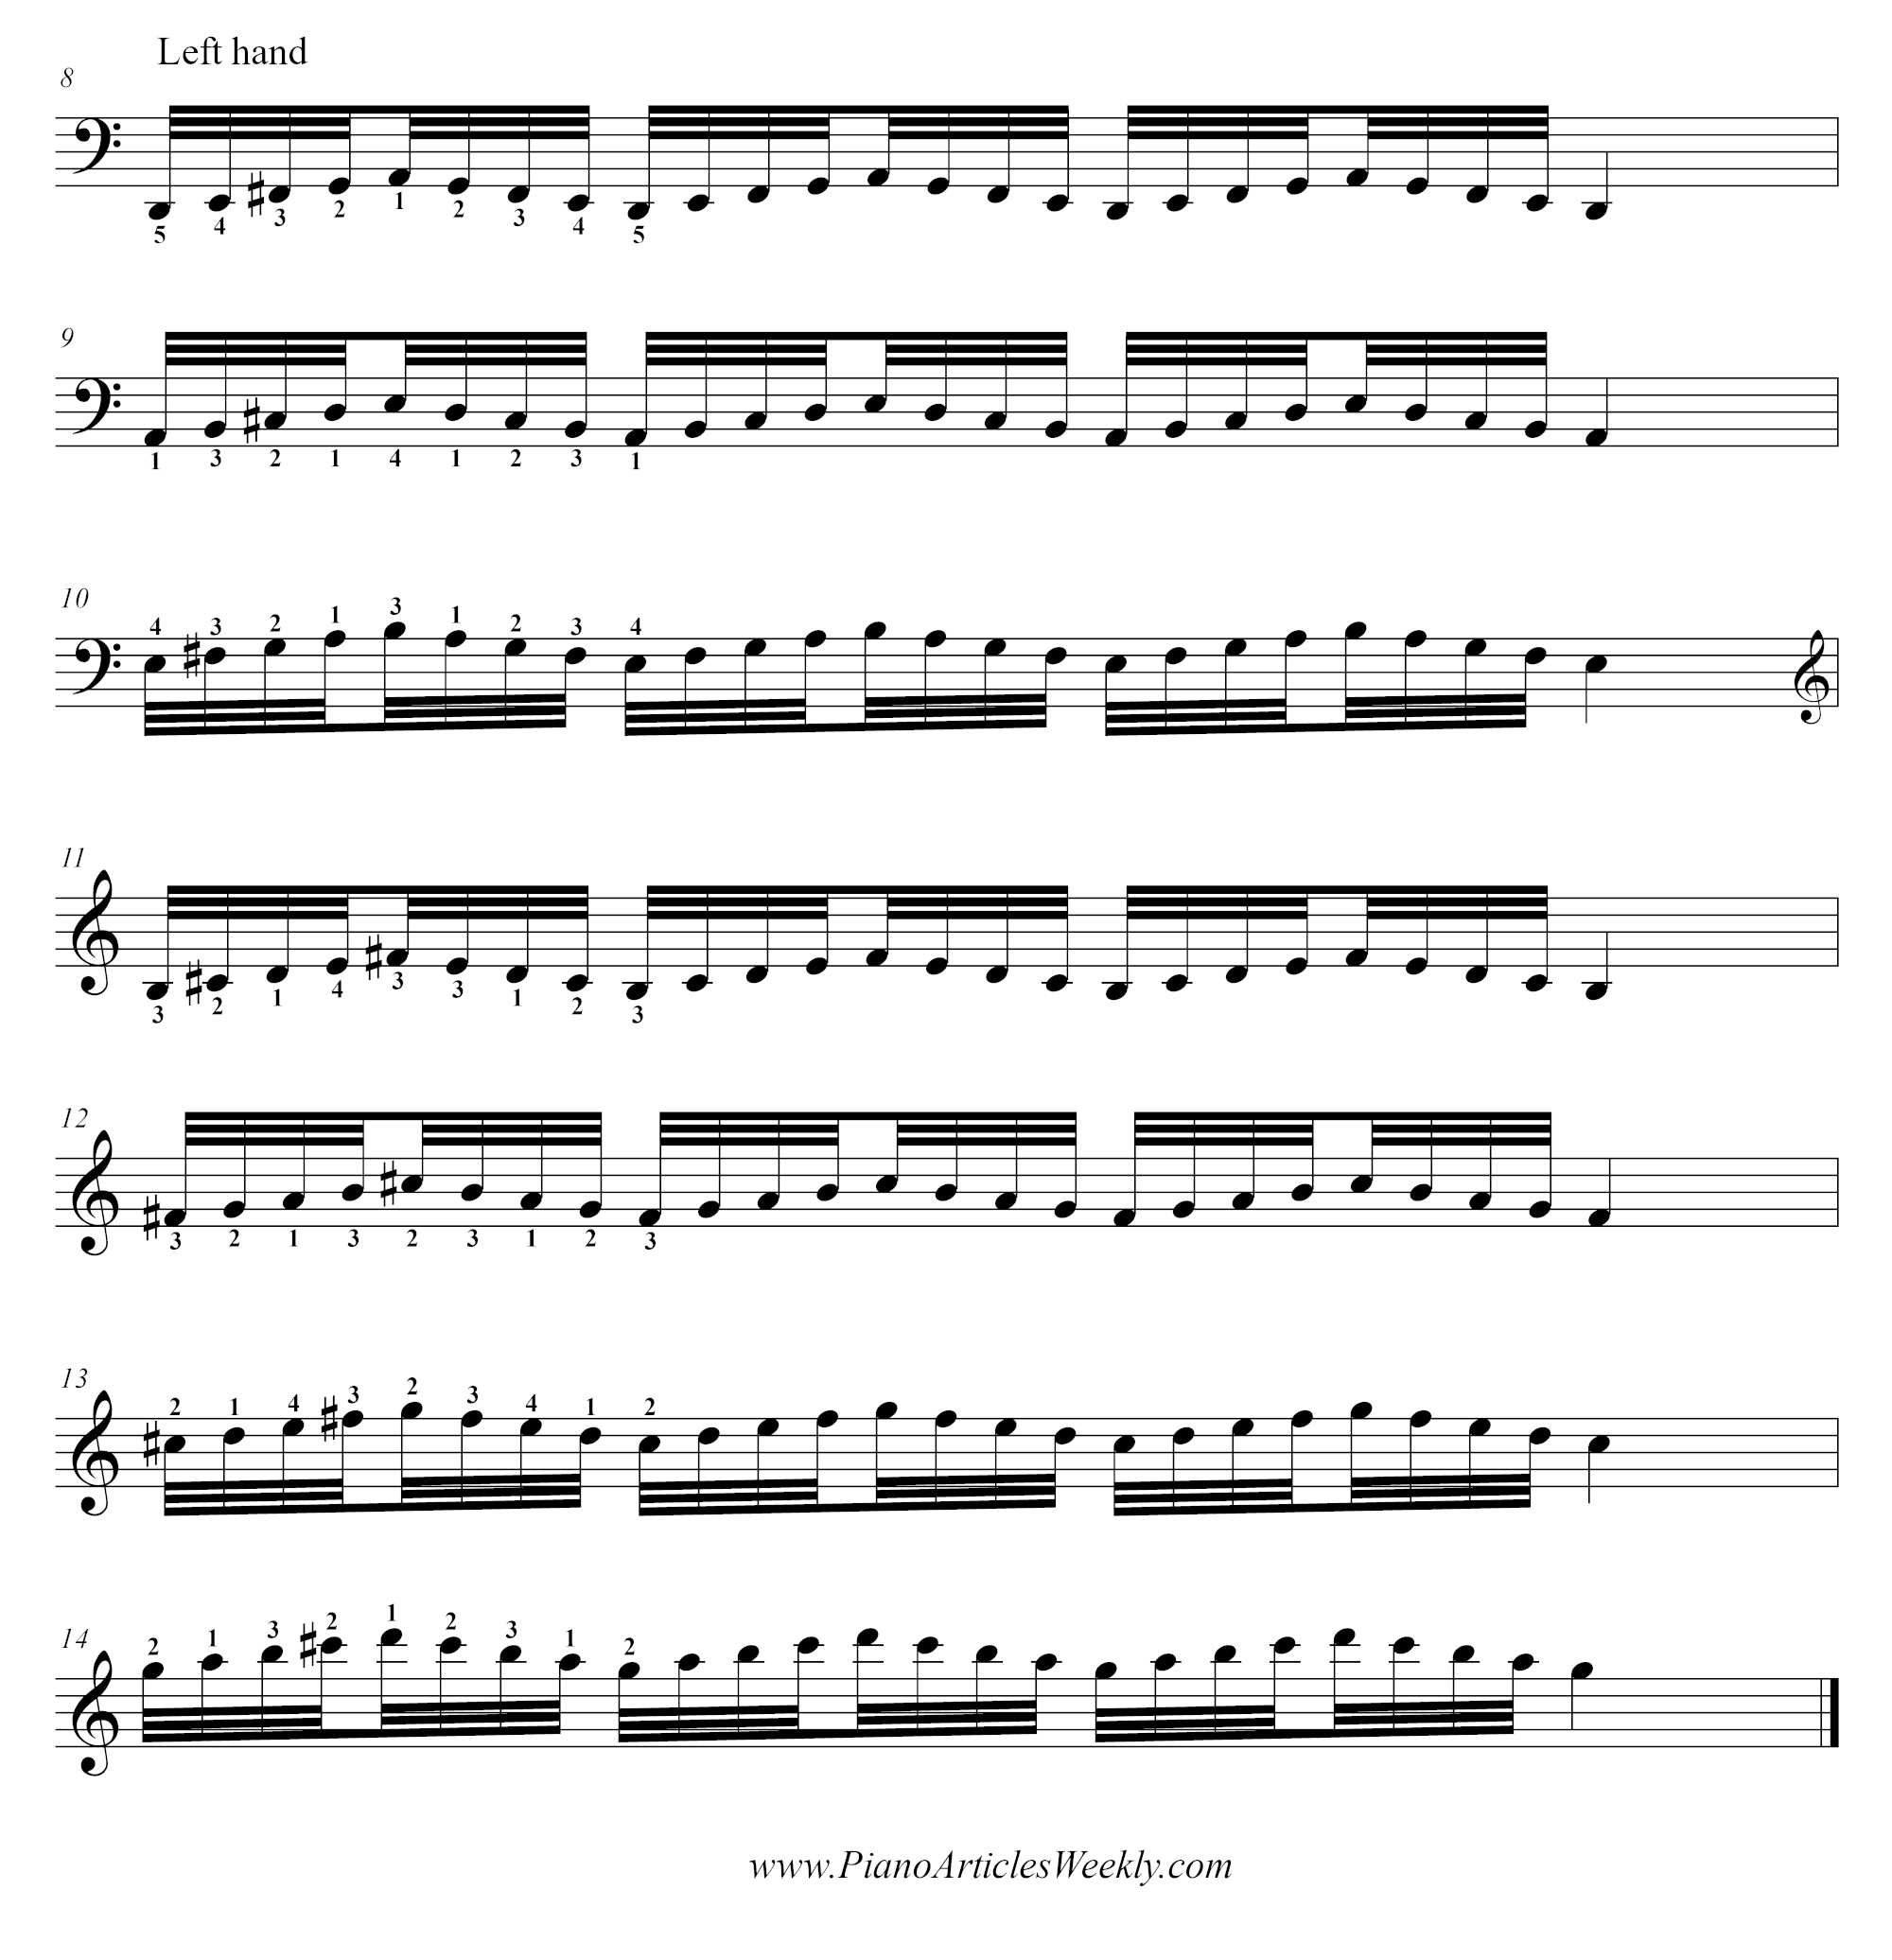 D major piano scale - advanced exercise in groups of four - left hand